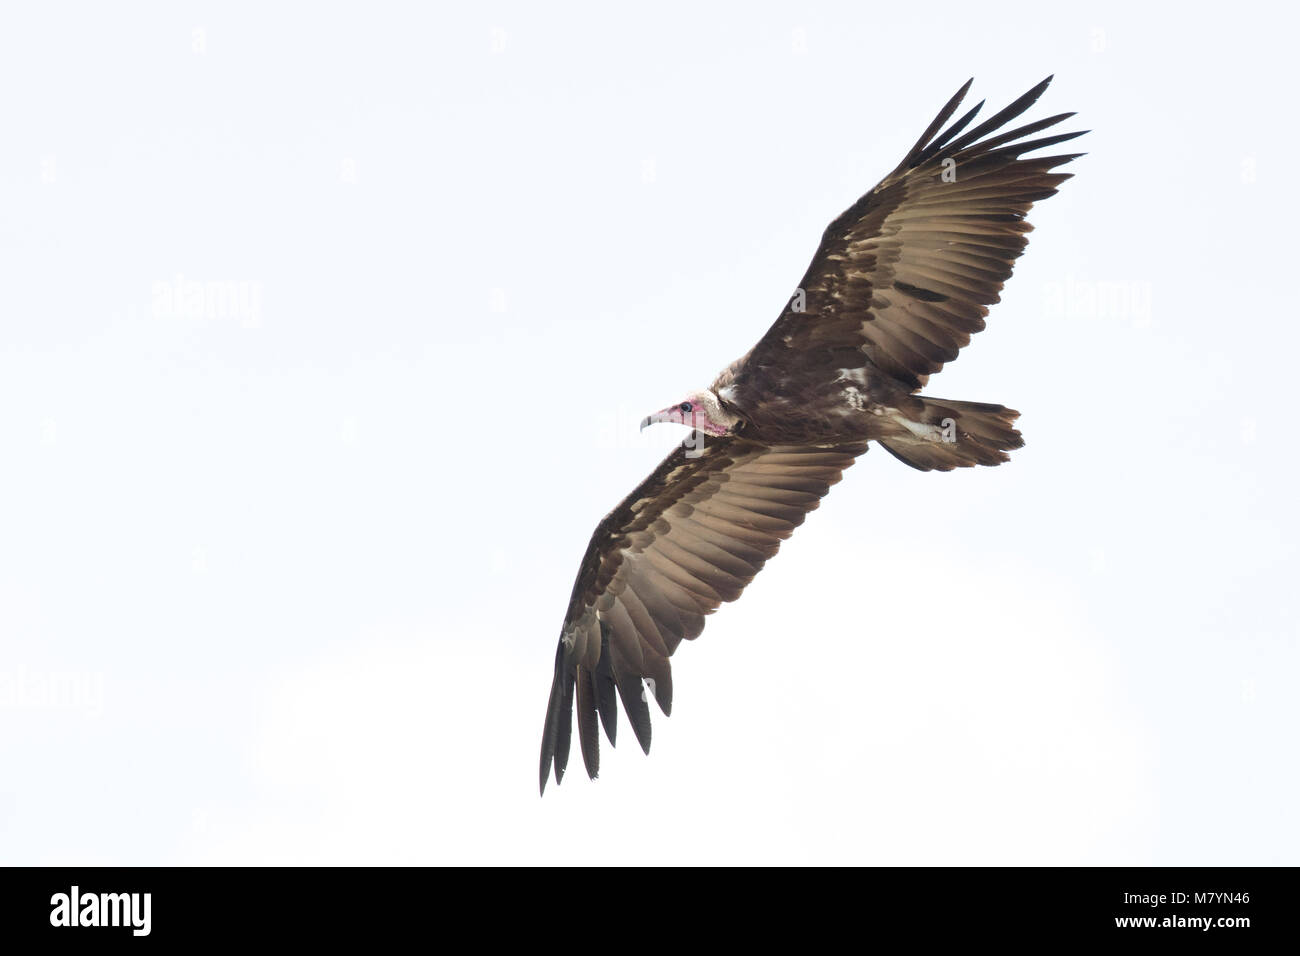 Vulture flying in the sky Stock Photo - Alamy